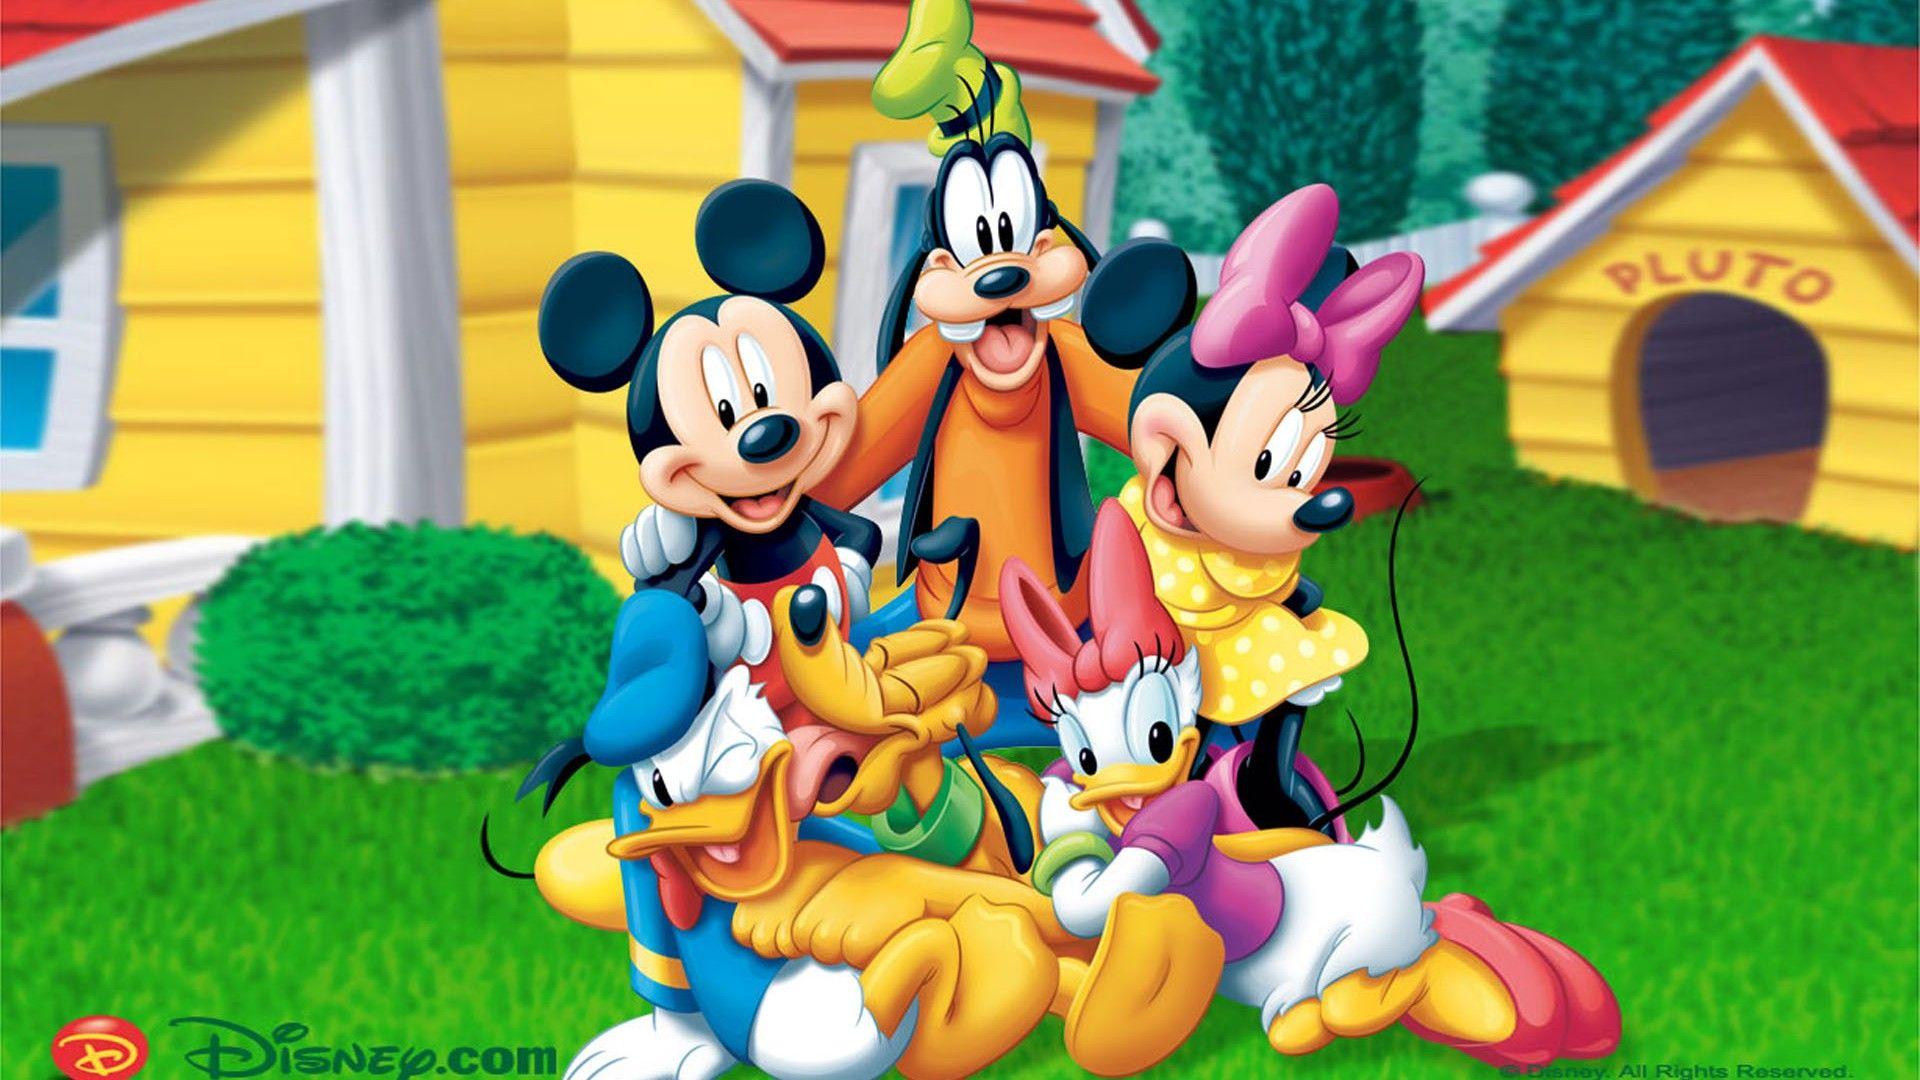 Mickey Mouse With Friends Background, Wallpaper13.com